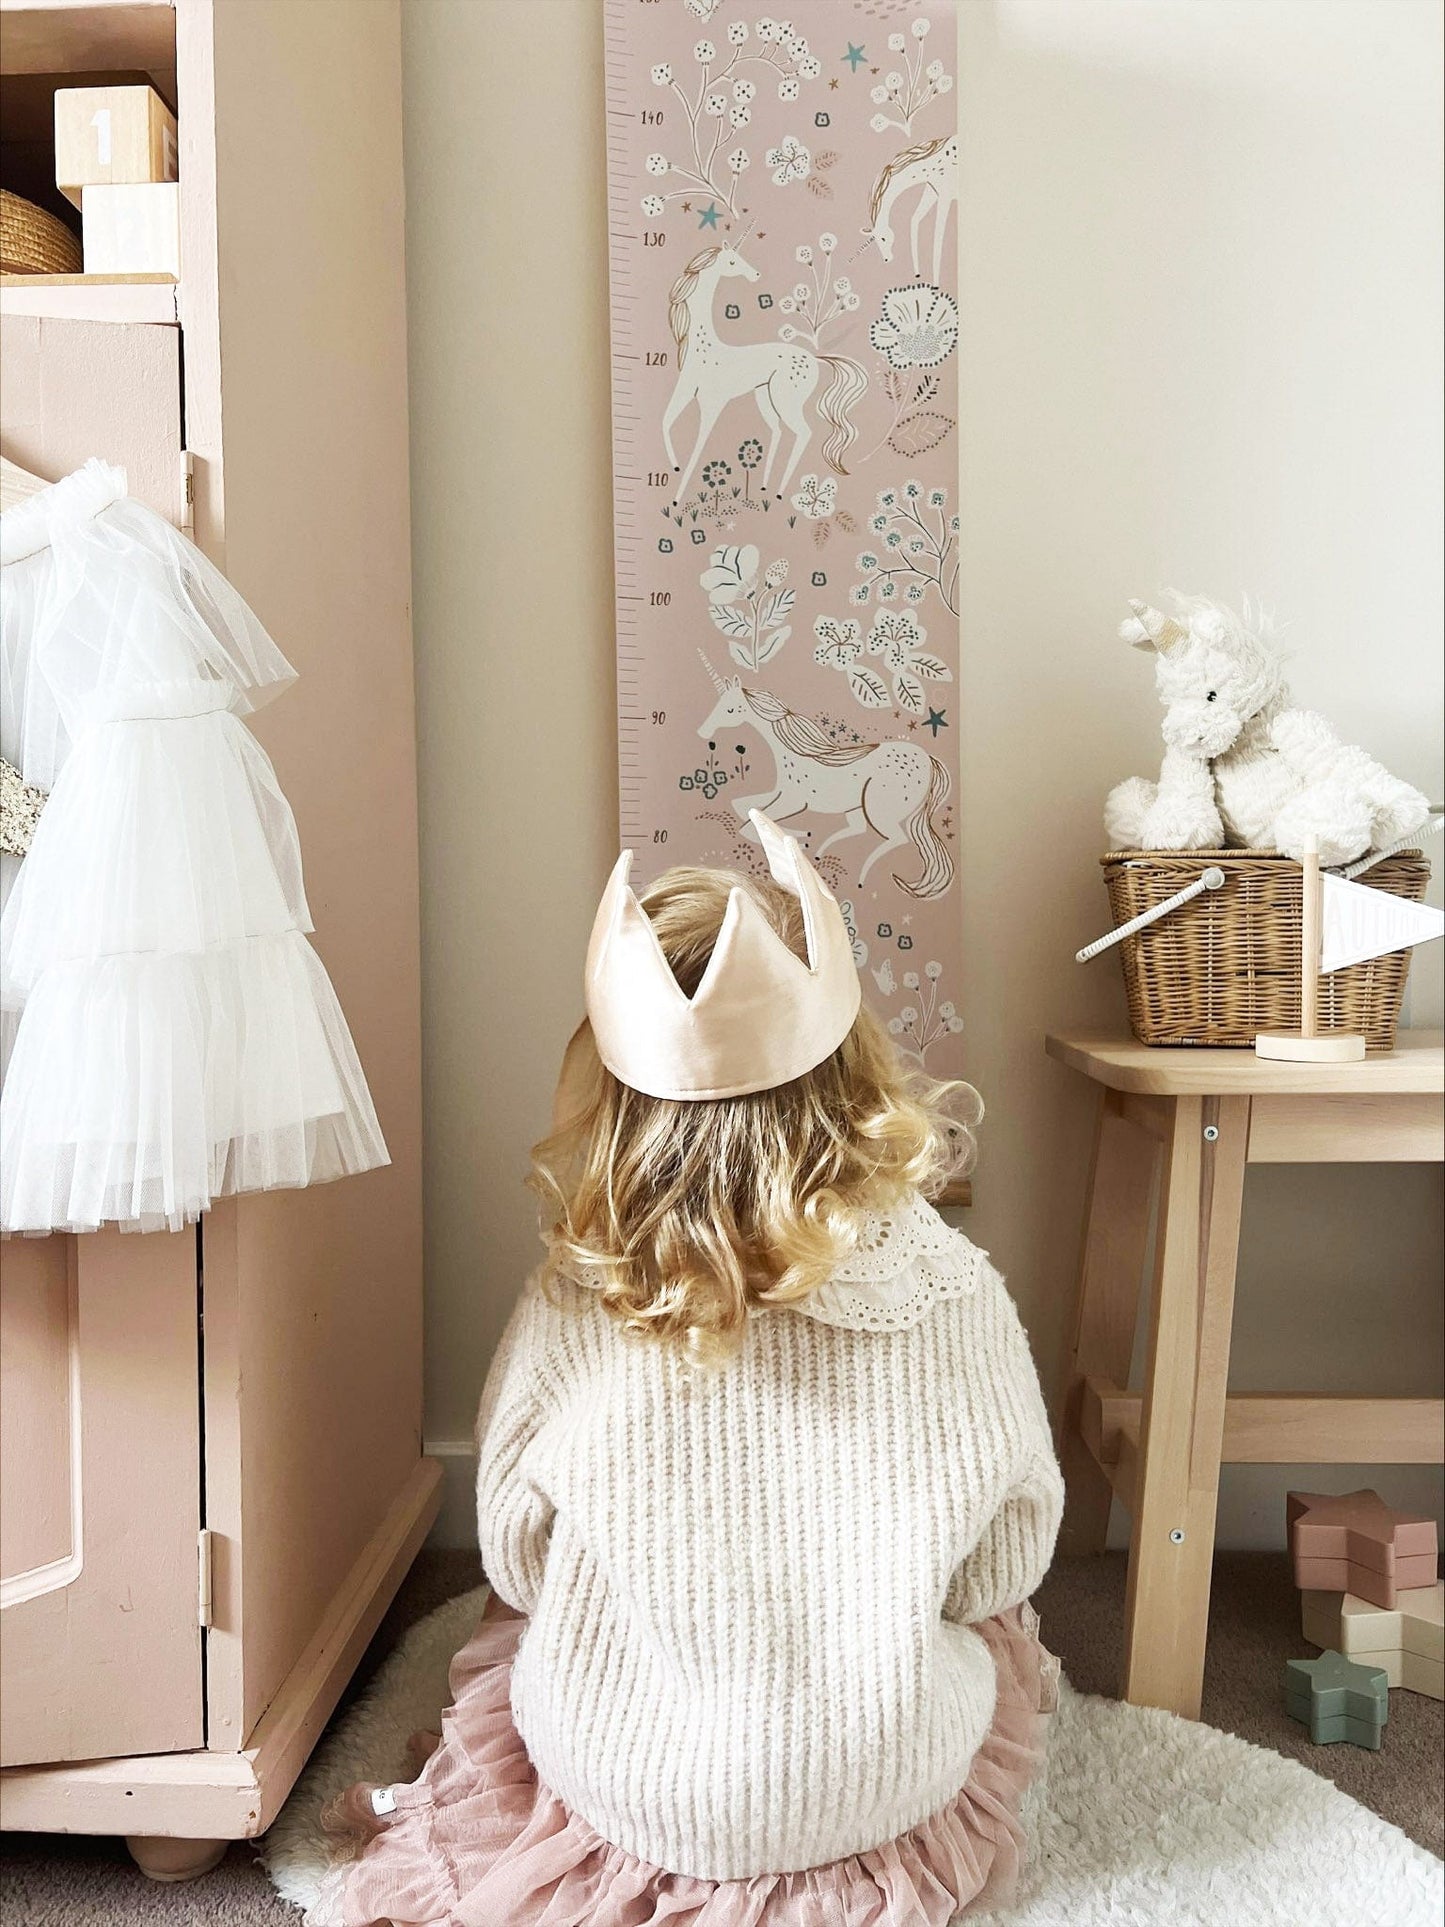 Girl in a fabric crown wearing a pink skirt and cream knit jumper, crouching in front of the unicorn height chart which is hanging between a pink vintage wardrobe and a wooden bench with a olli ella piki basket on it.